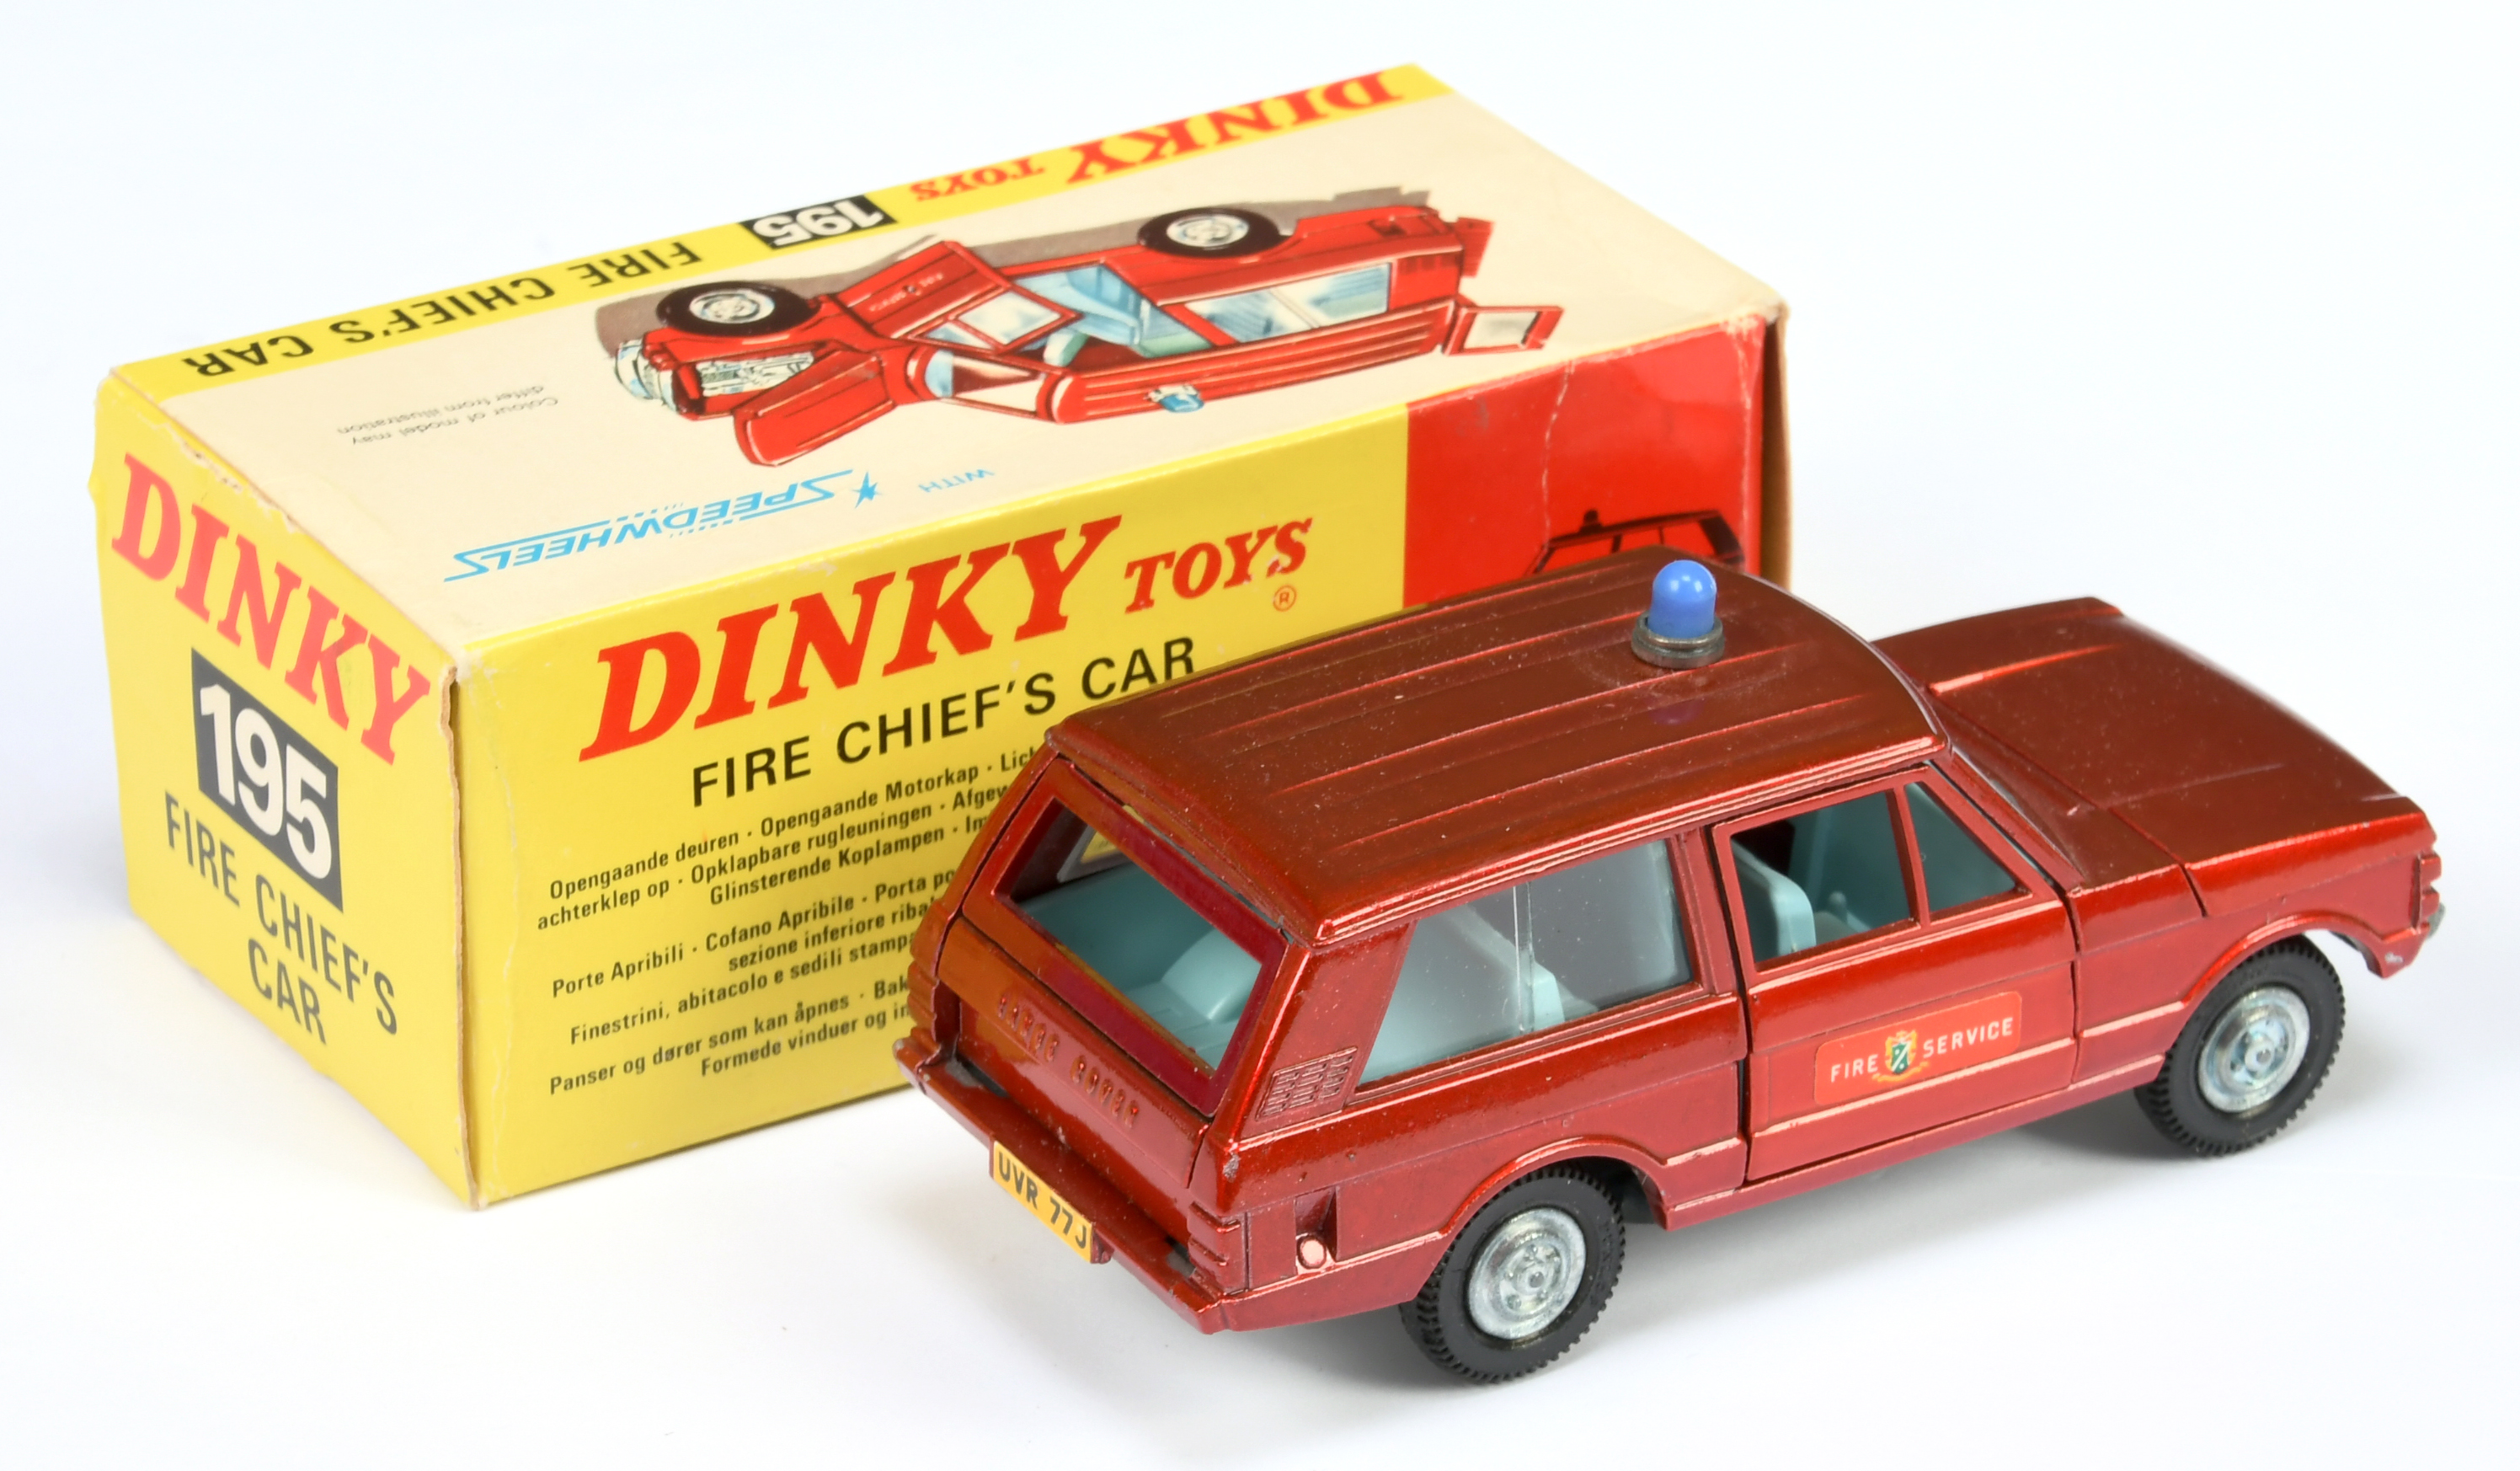 Dinky Toys 195 Range Rover "Fire Chief" - Metallic red body, light blue interior, mid-blue solid ... - Image 2 of 2